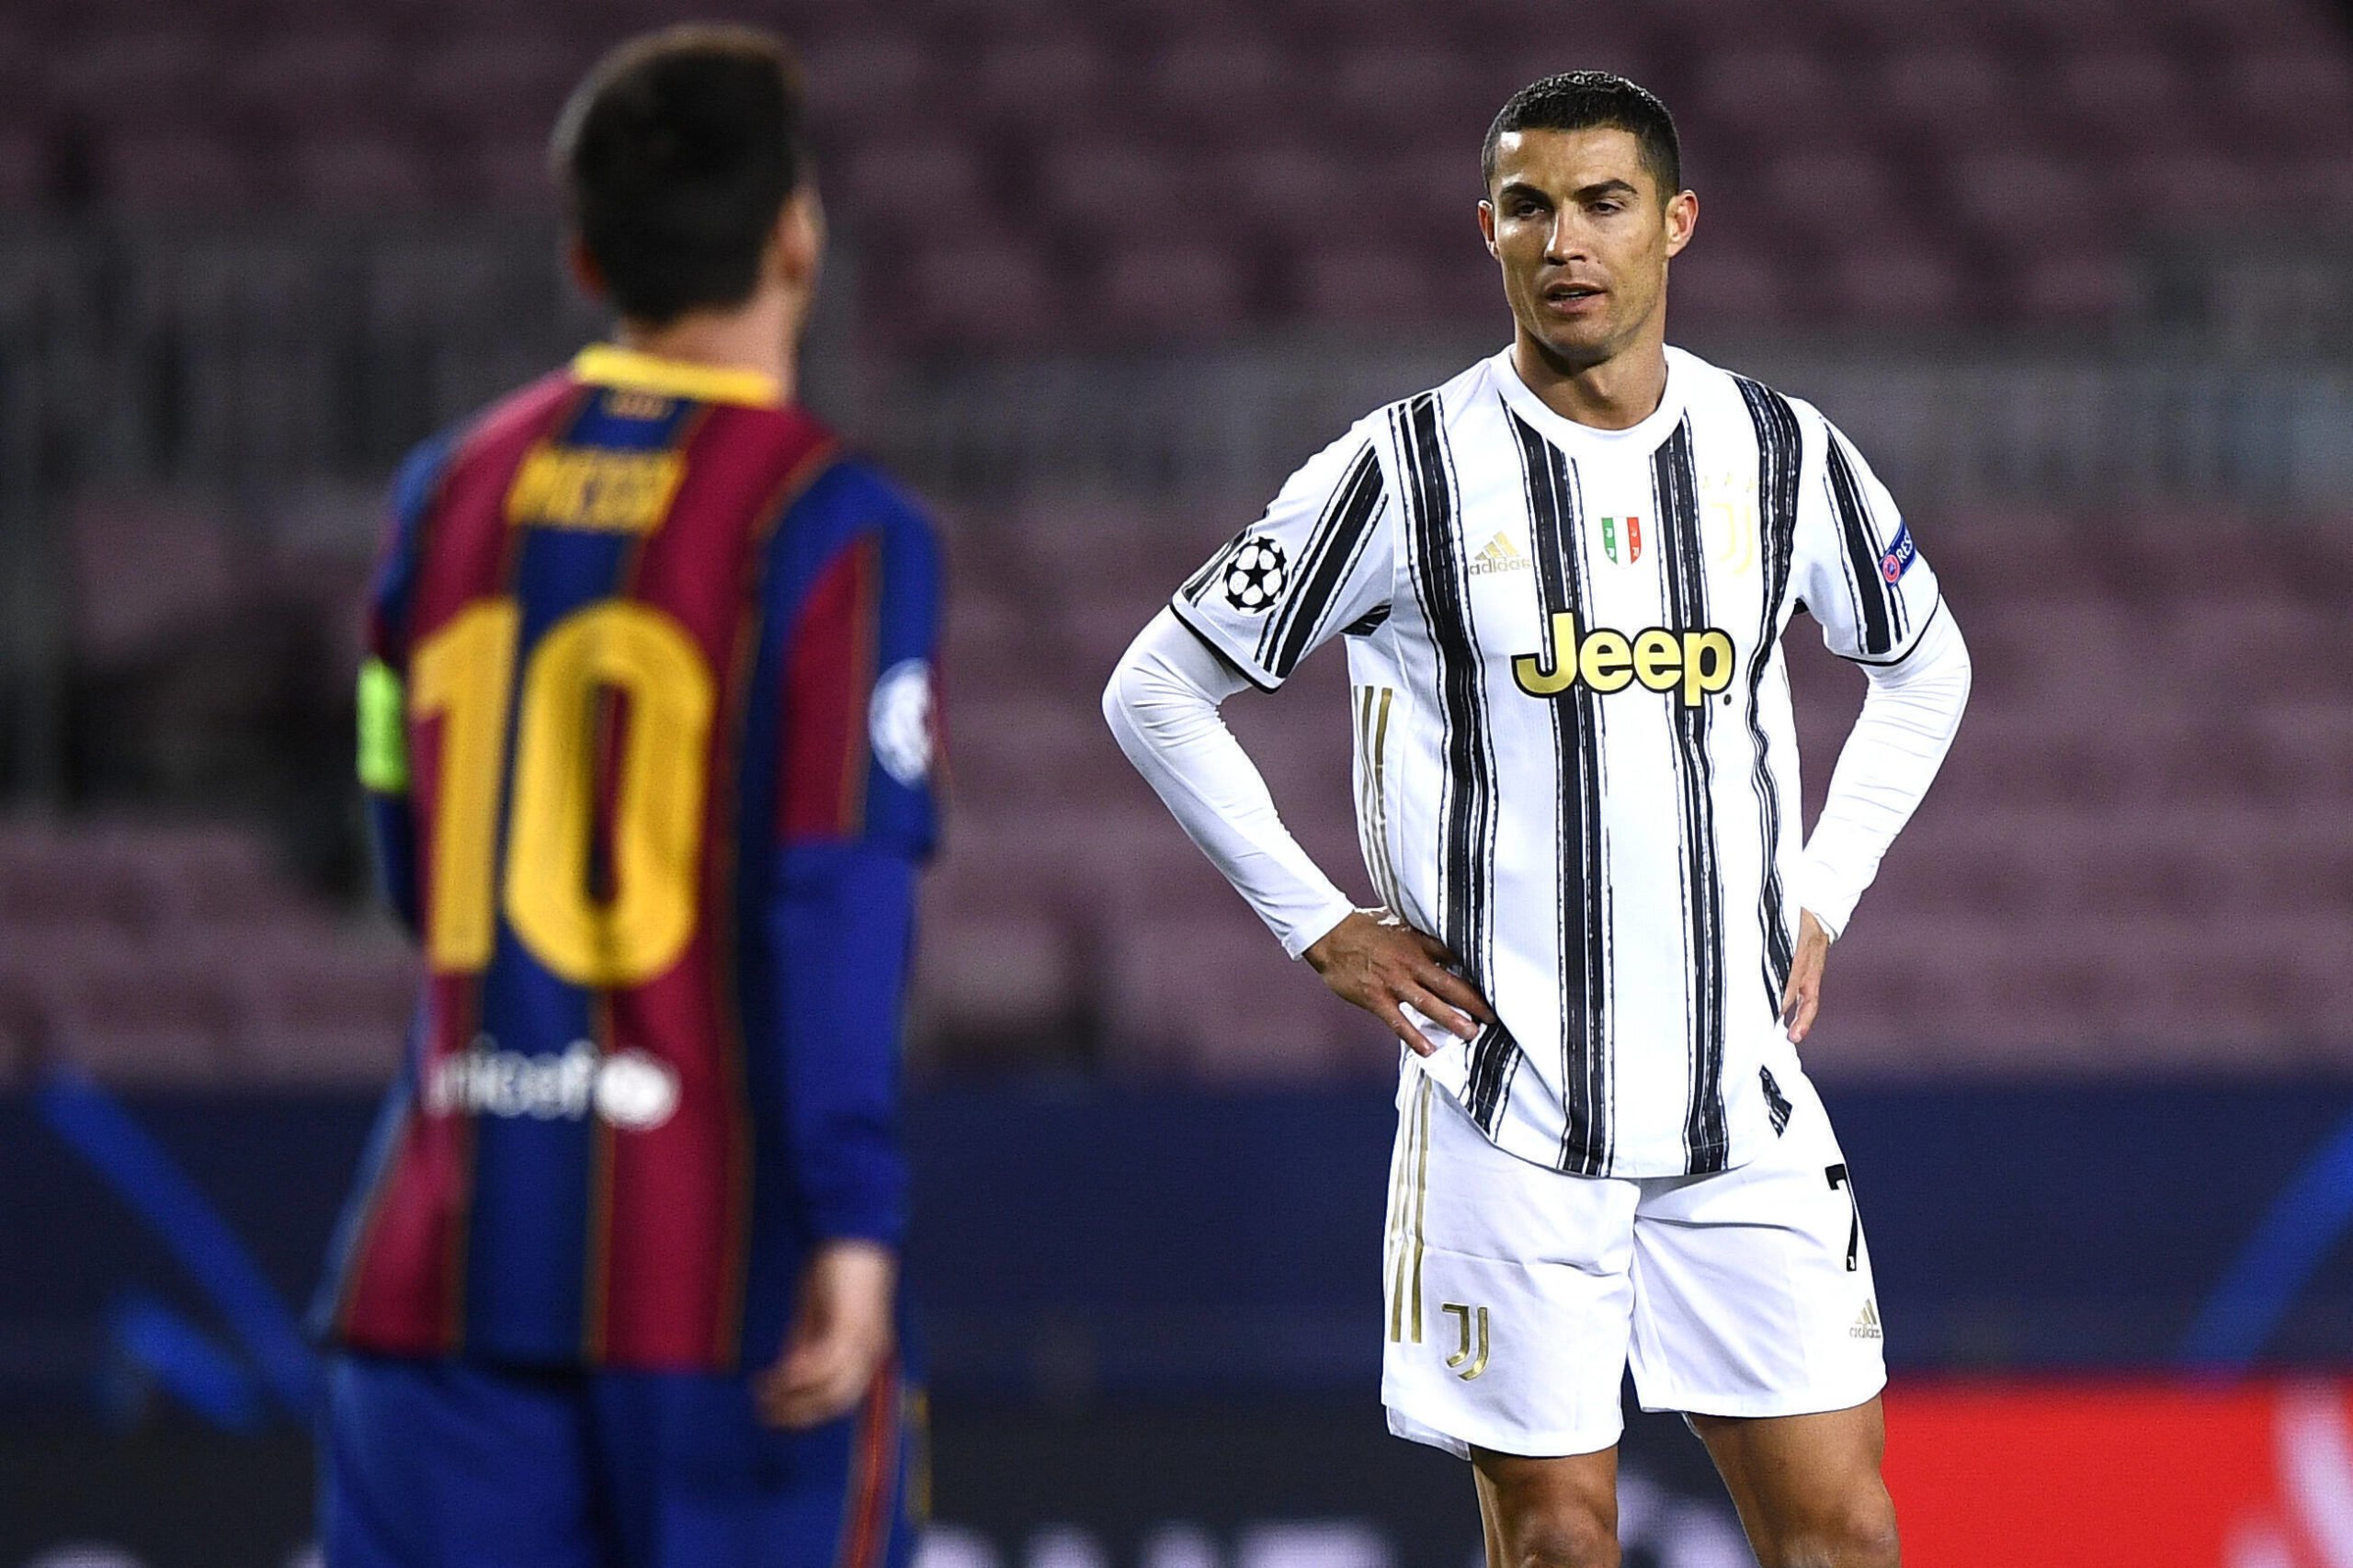 Manchester City offered a chance to land Ronaldo who is seen in the picture